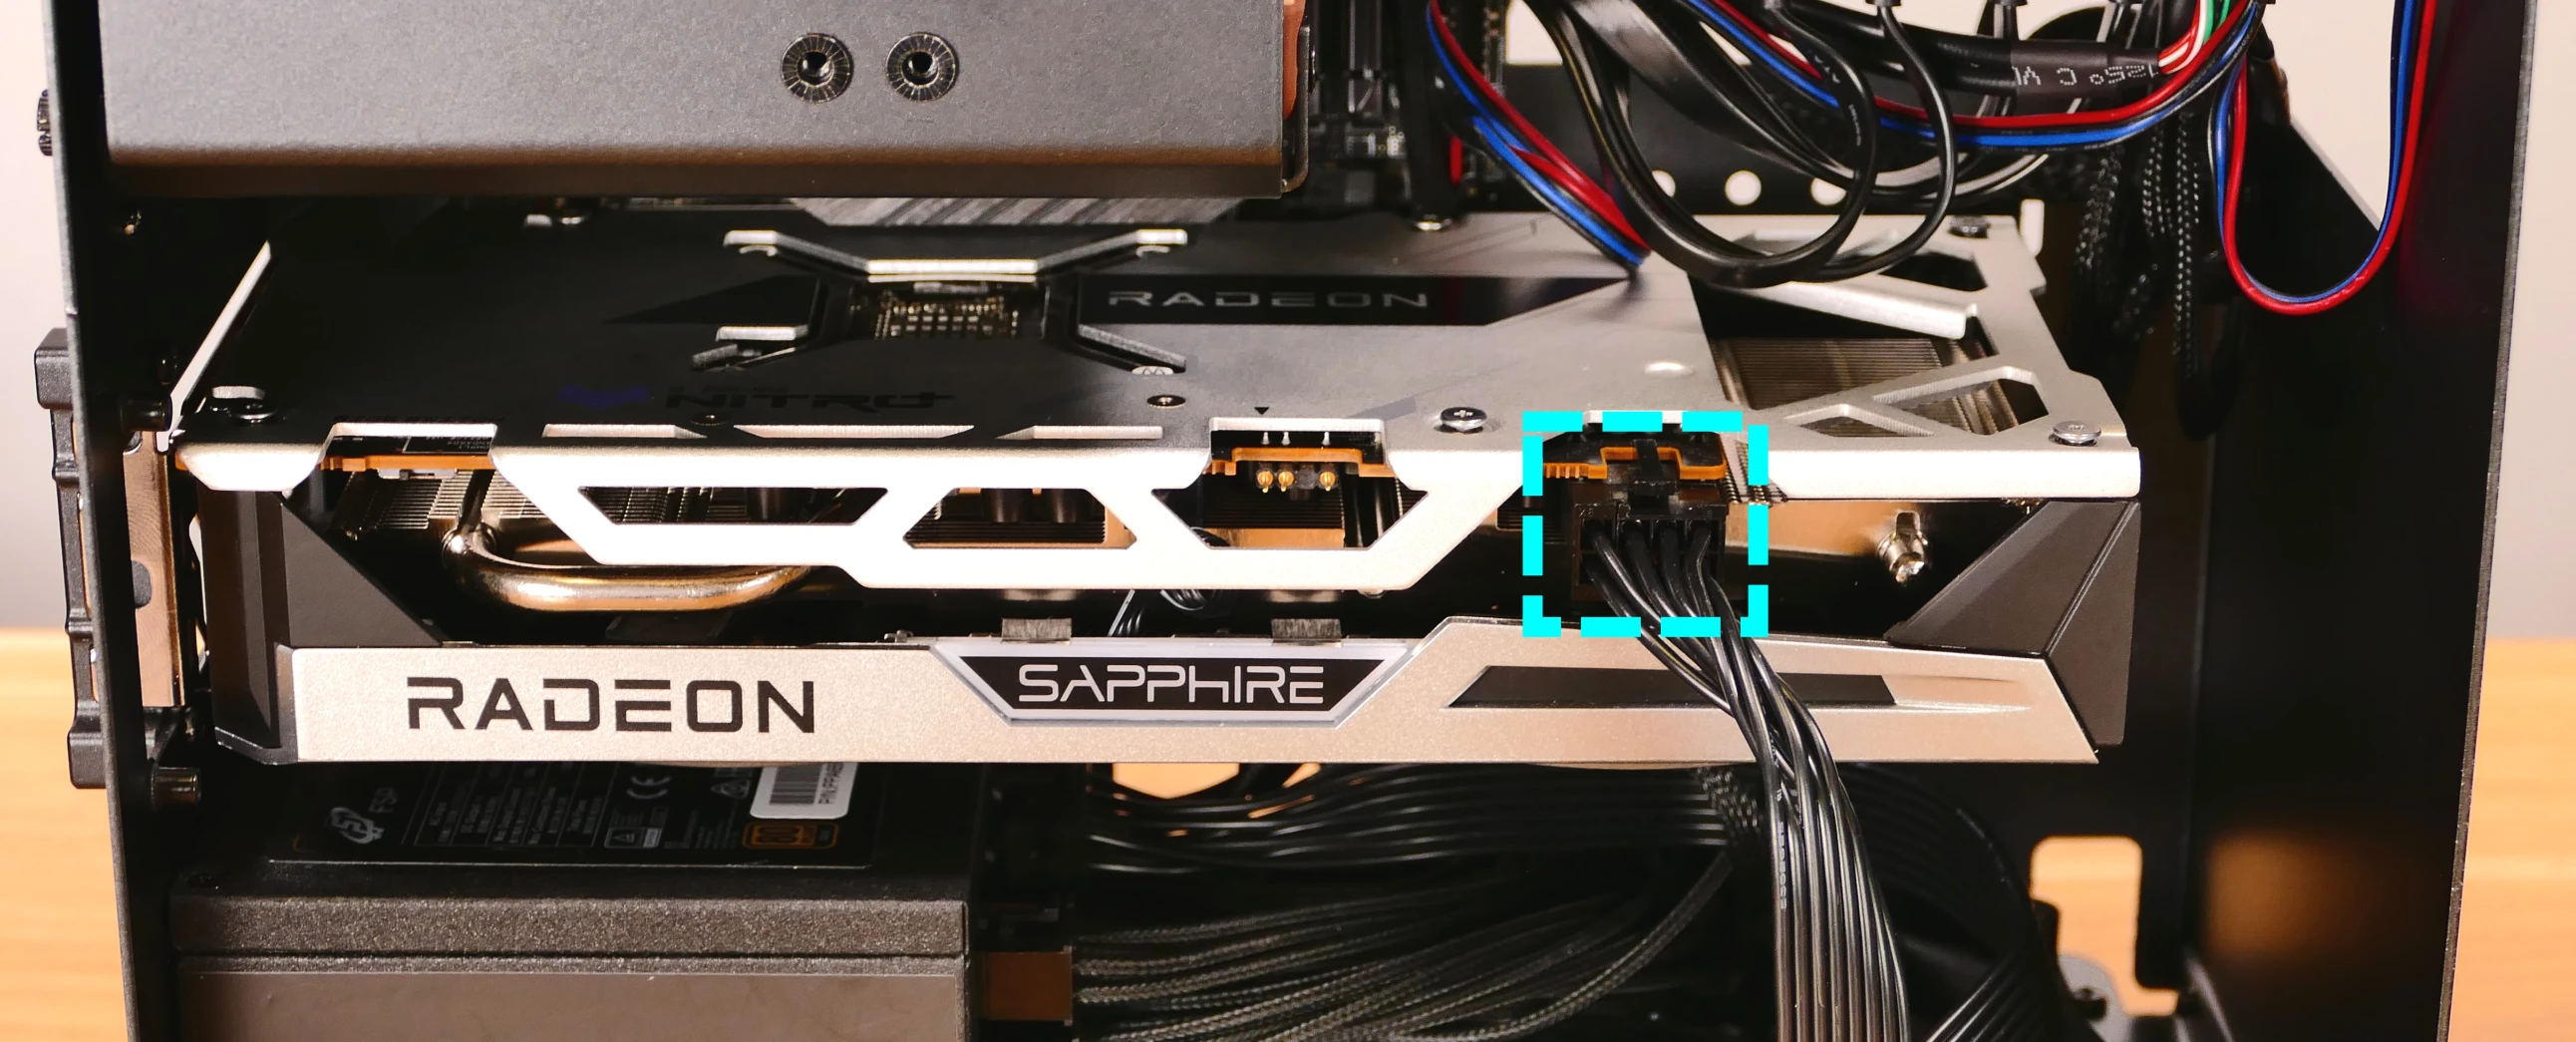 GPU power connections